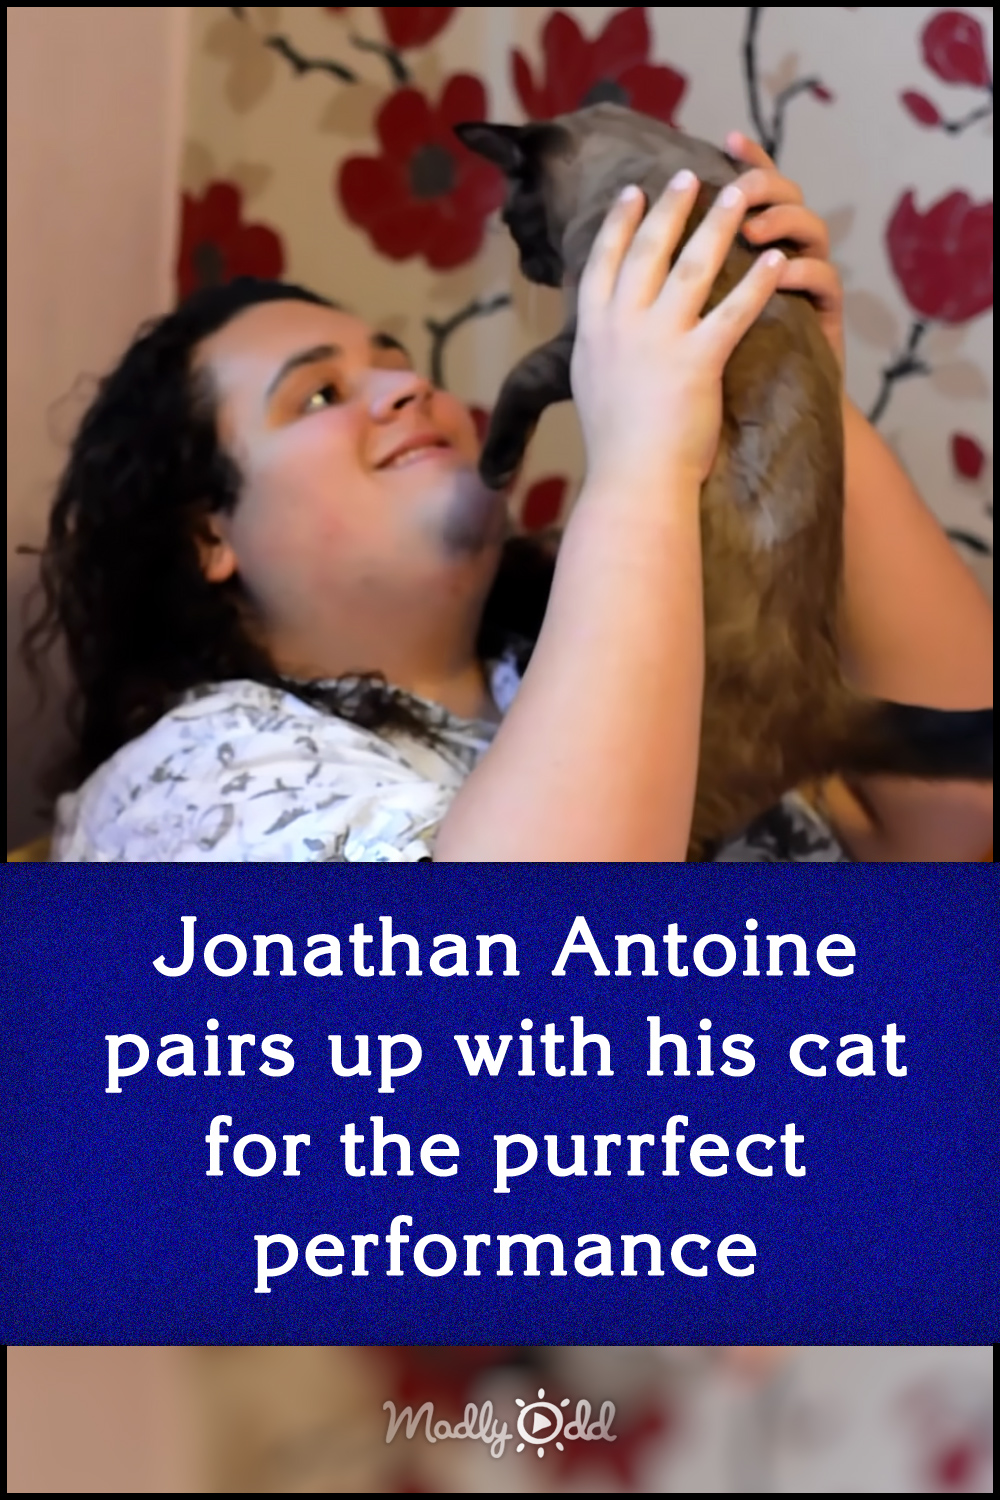 Jonathan Antoine pairs up with his cat for the purrfect performance